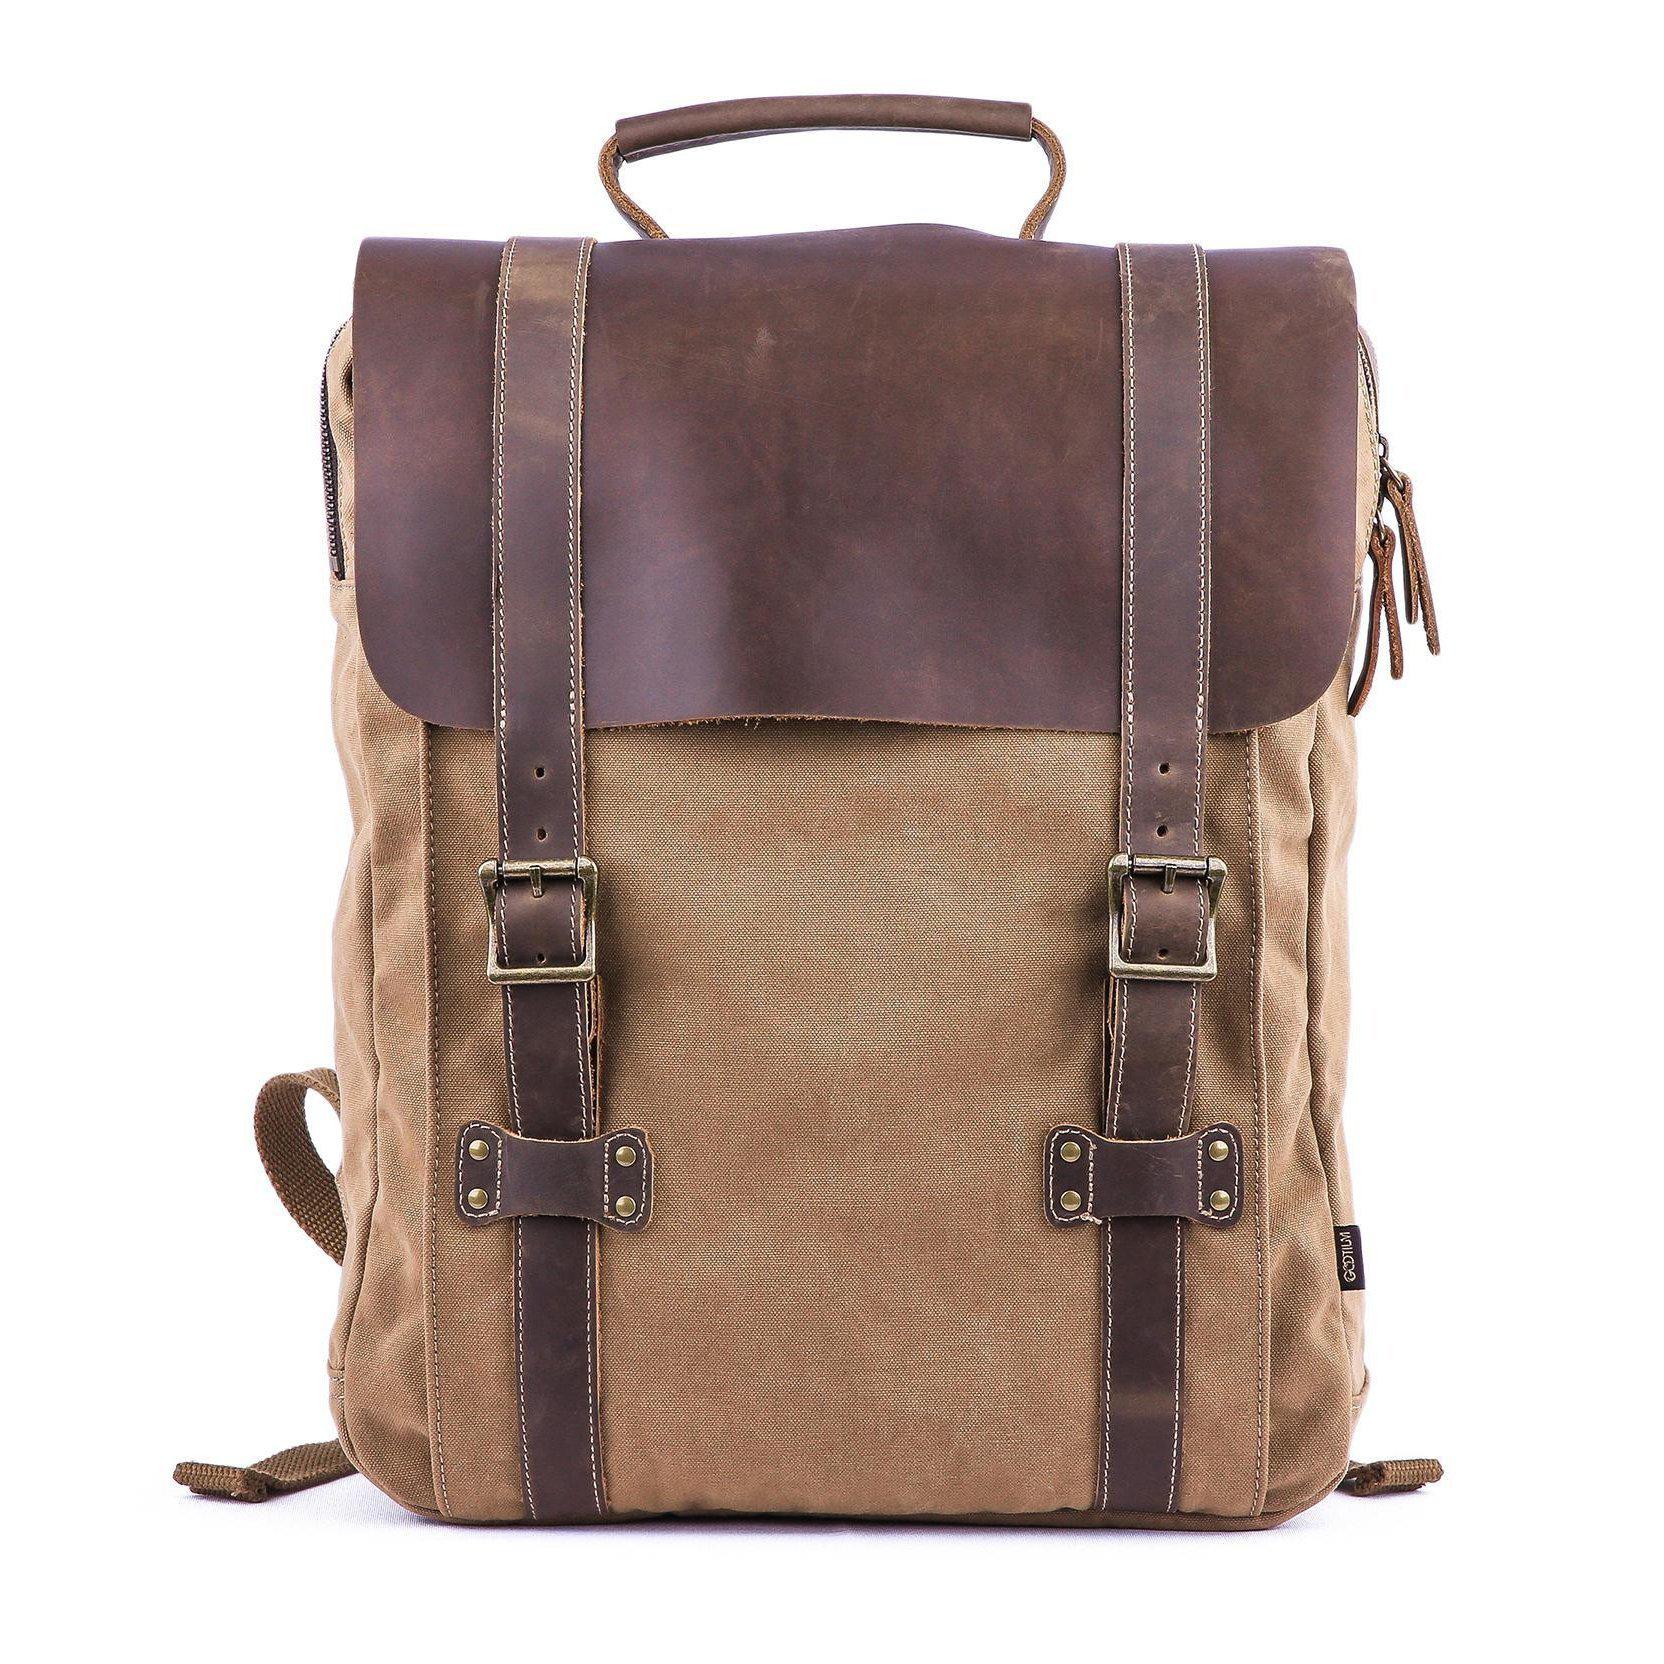 High-Quality Brown Fabric Canvas School Backpack